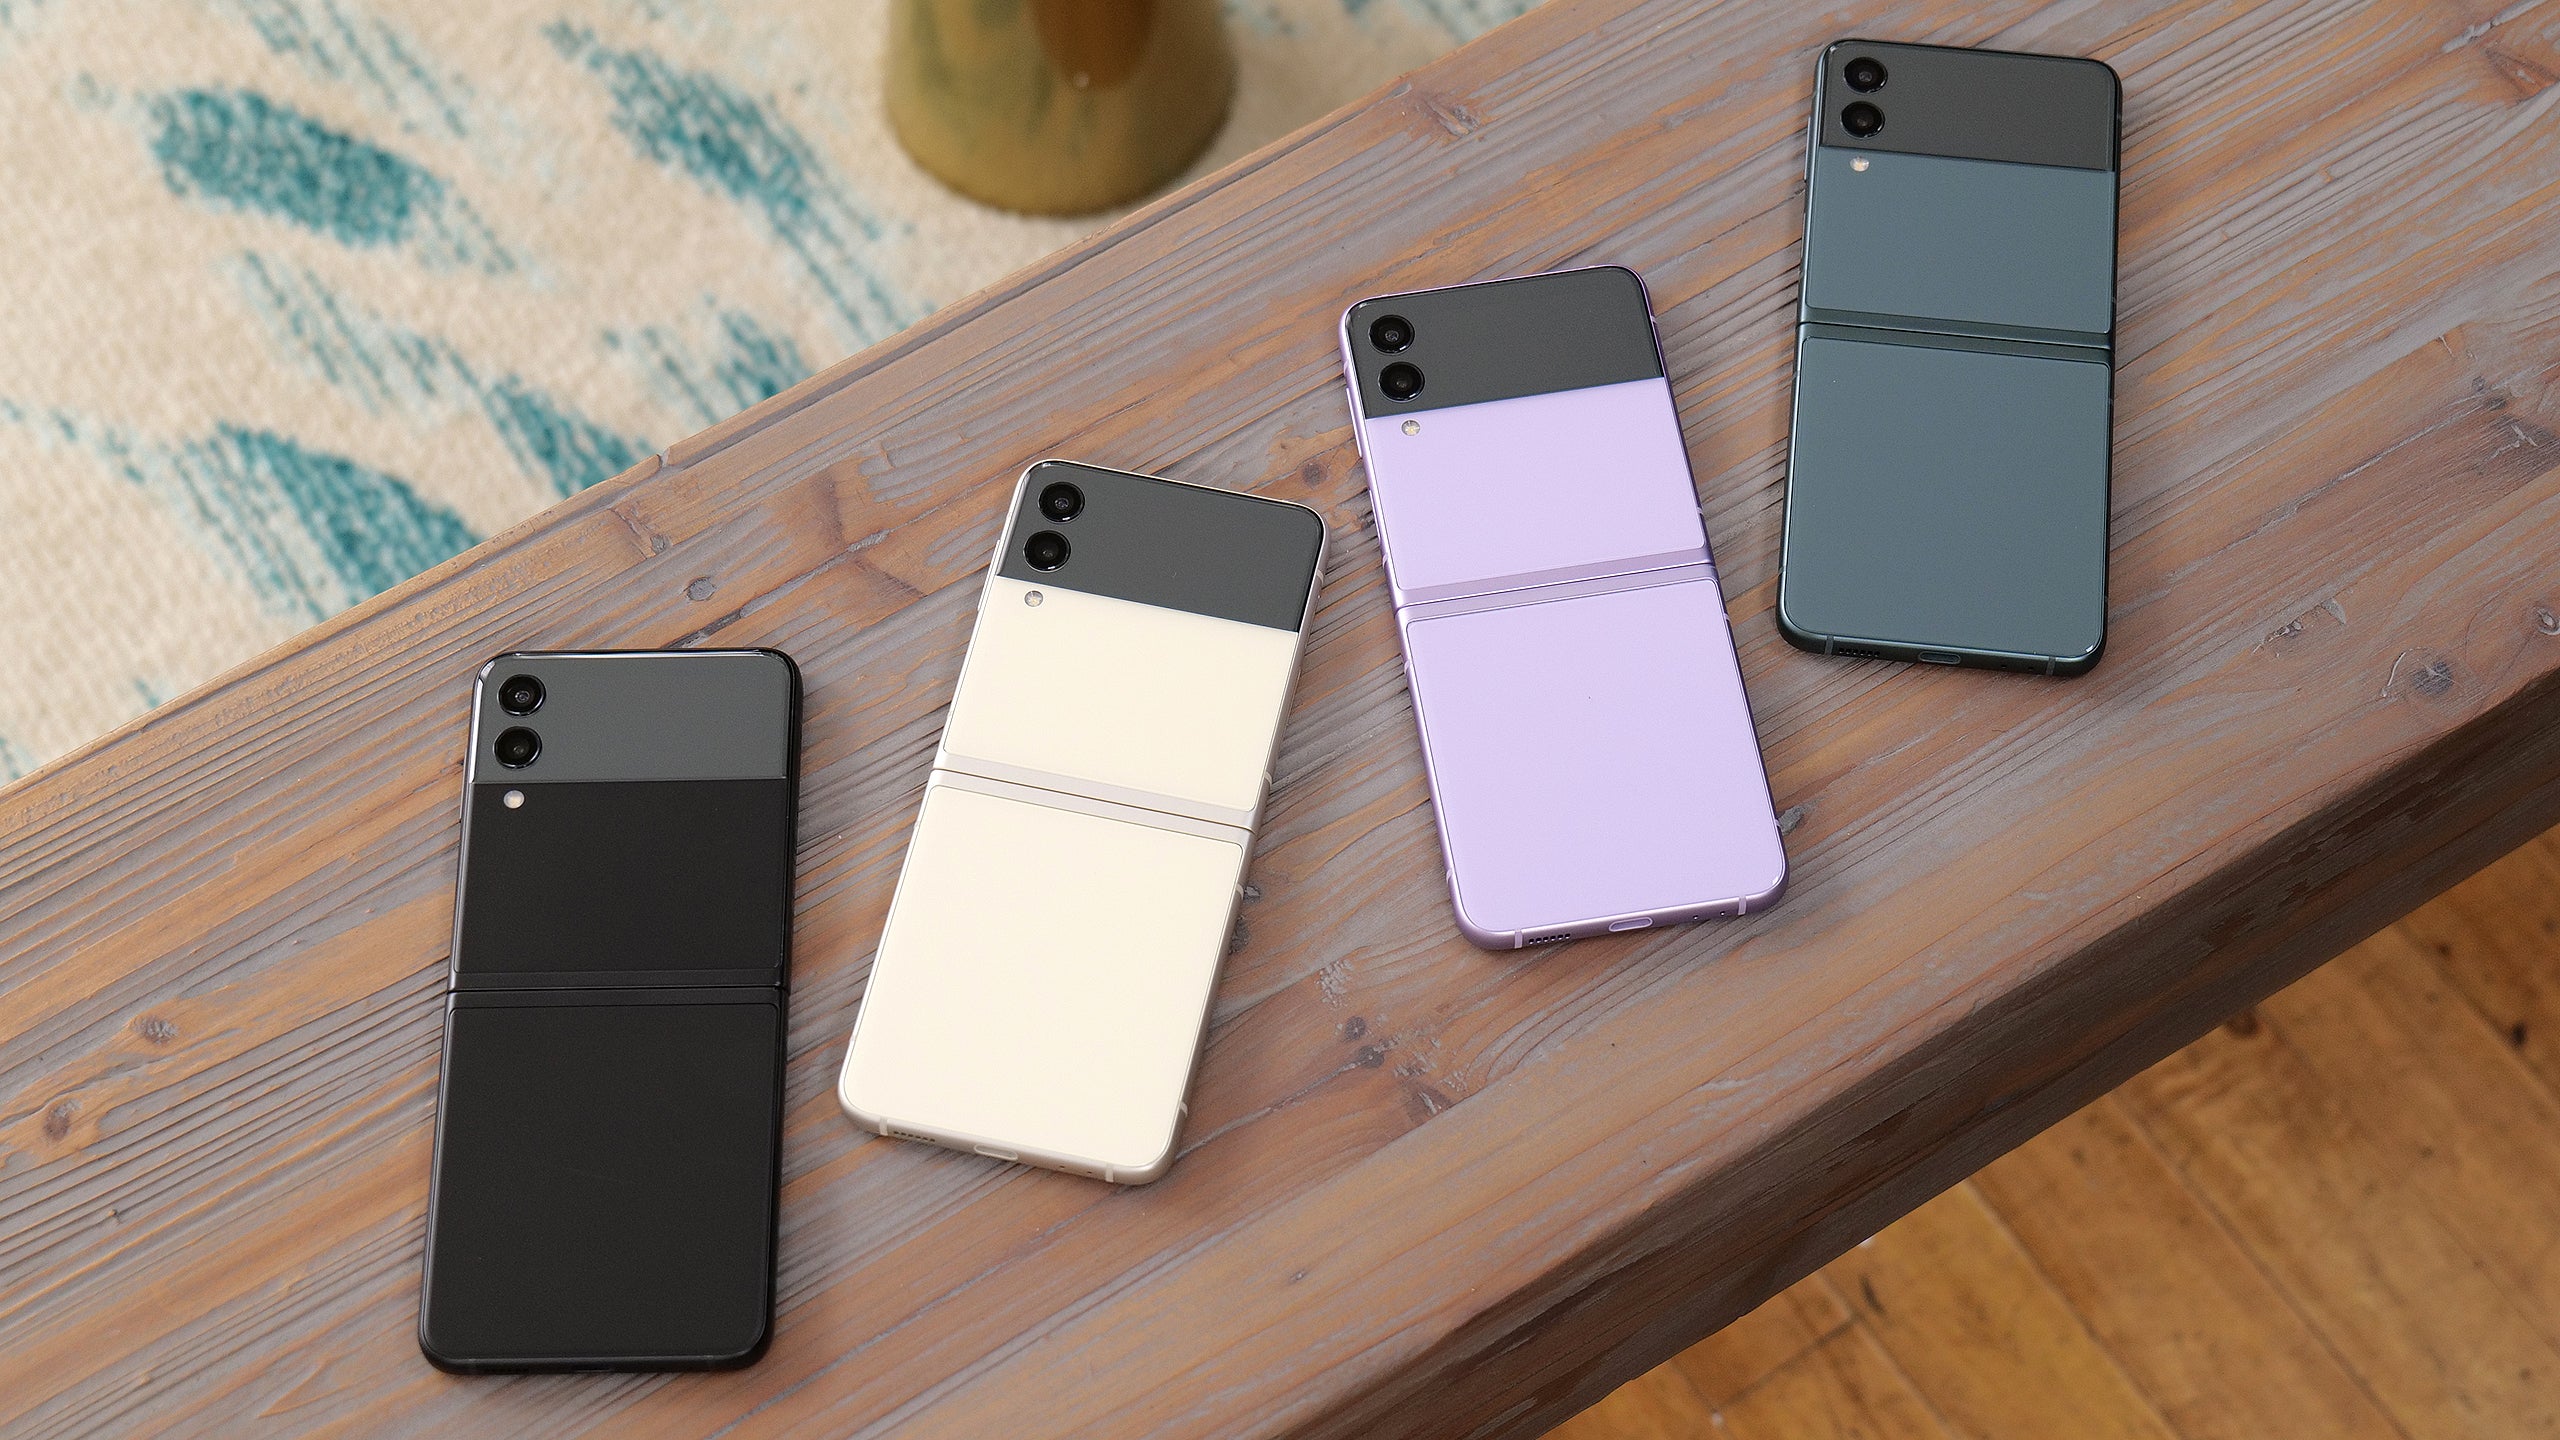 From left to right, we have black, cream, lavender, and grey variants of the Galaxy Z Flip 3.  (Photo: Sam Rutherford / Gizmodo)